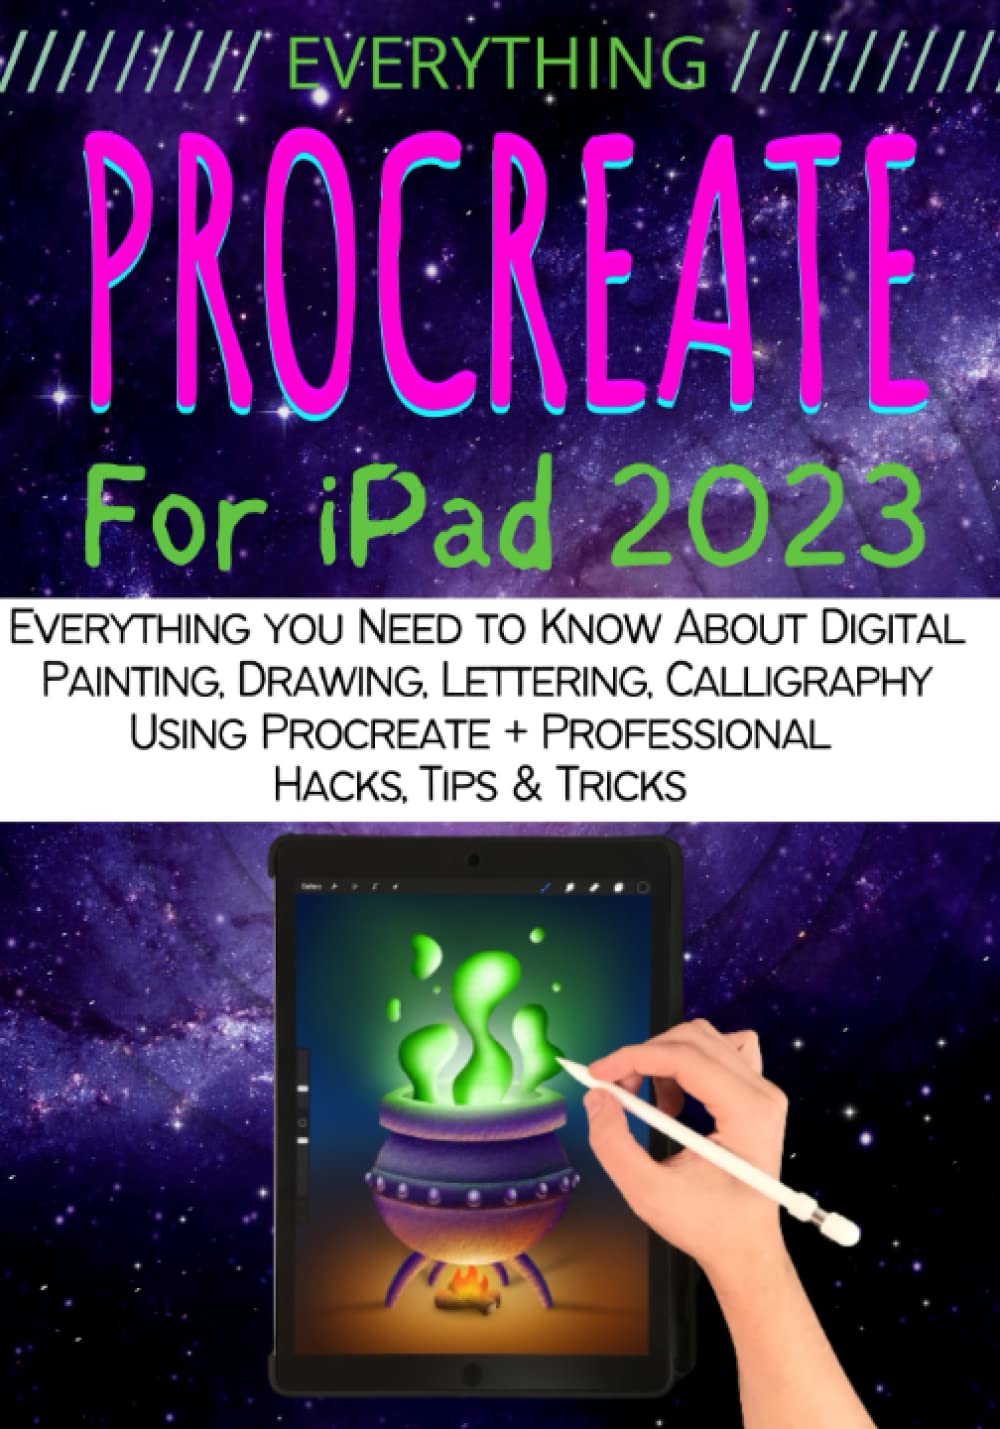 EVERYTHING PROCREATE For iPad: Everything you Need to Know About Digital Painting, Drawing, Lettering, Calligraphy Using Procreate + Professional Hacks, Tips & Tricks (PROCREATE MASTERY GUIDE)